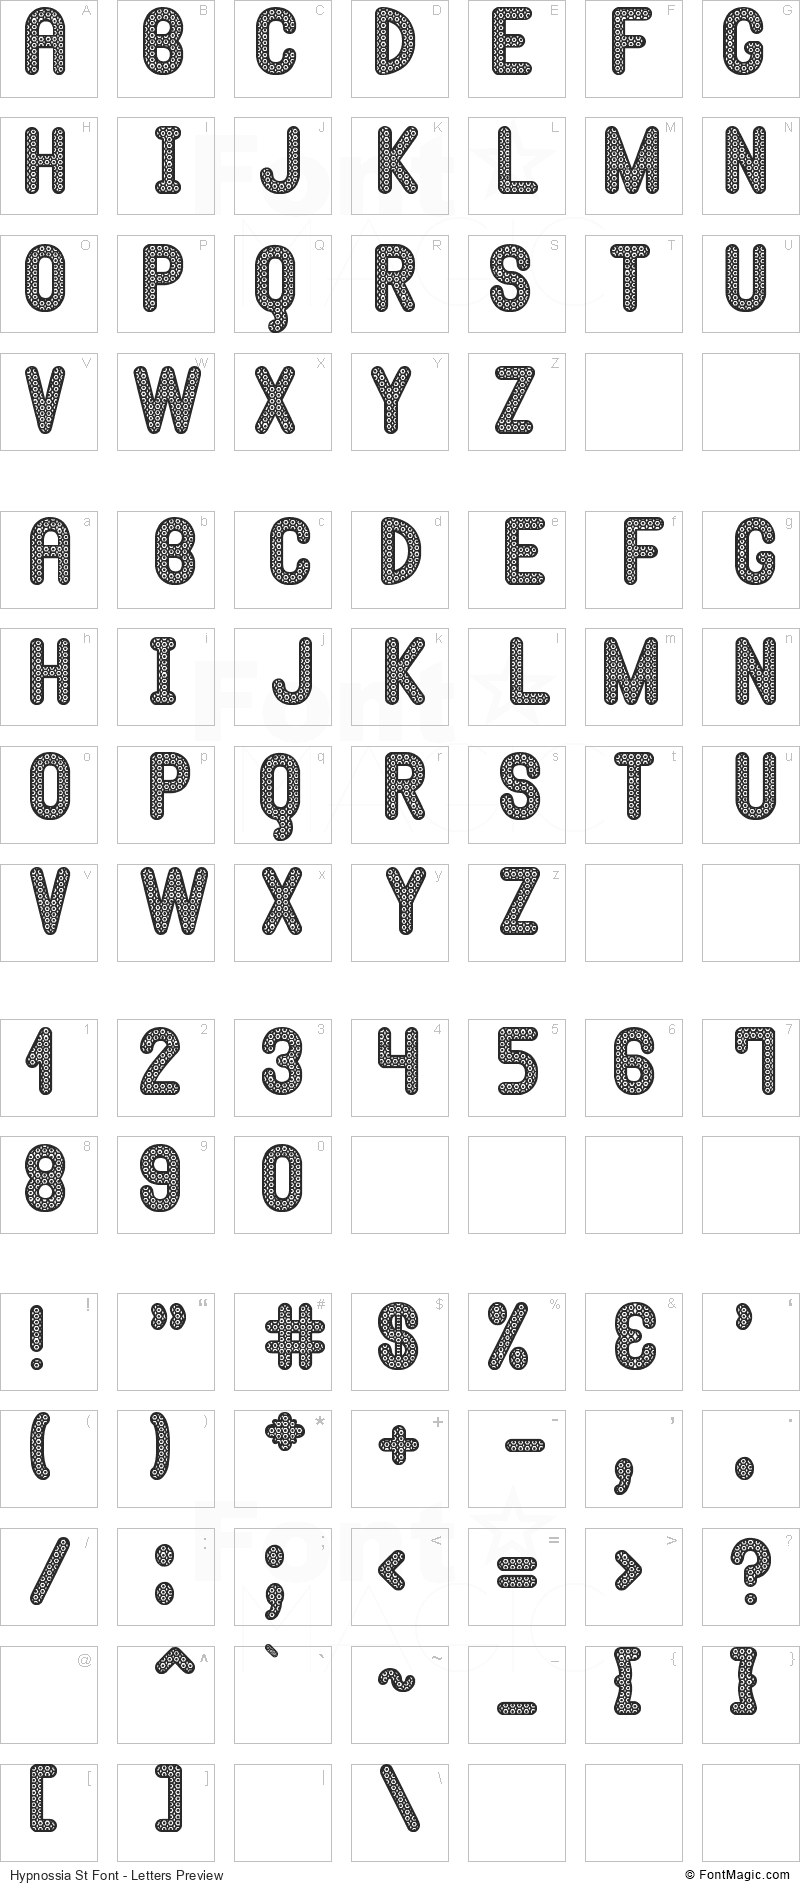 Hypnossia St Font - All Latters Preview Chart